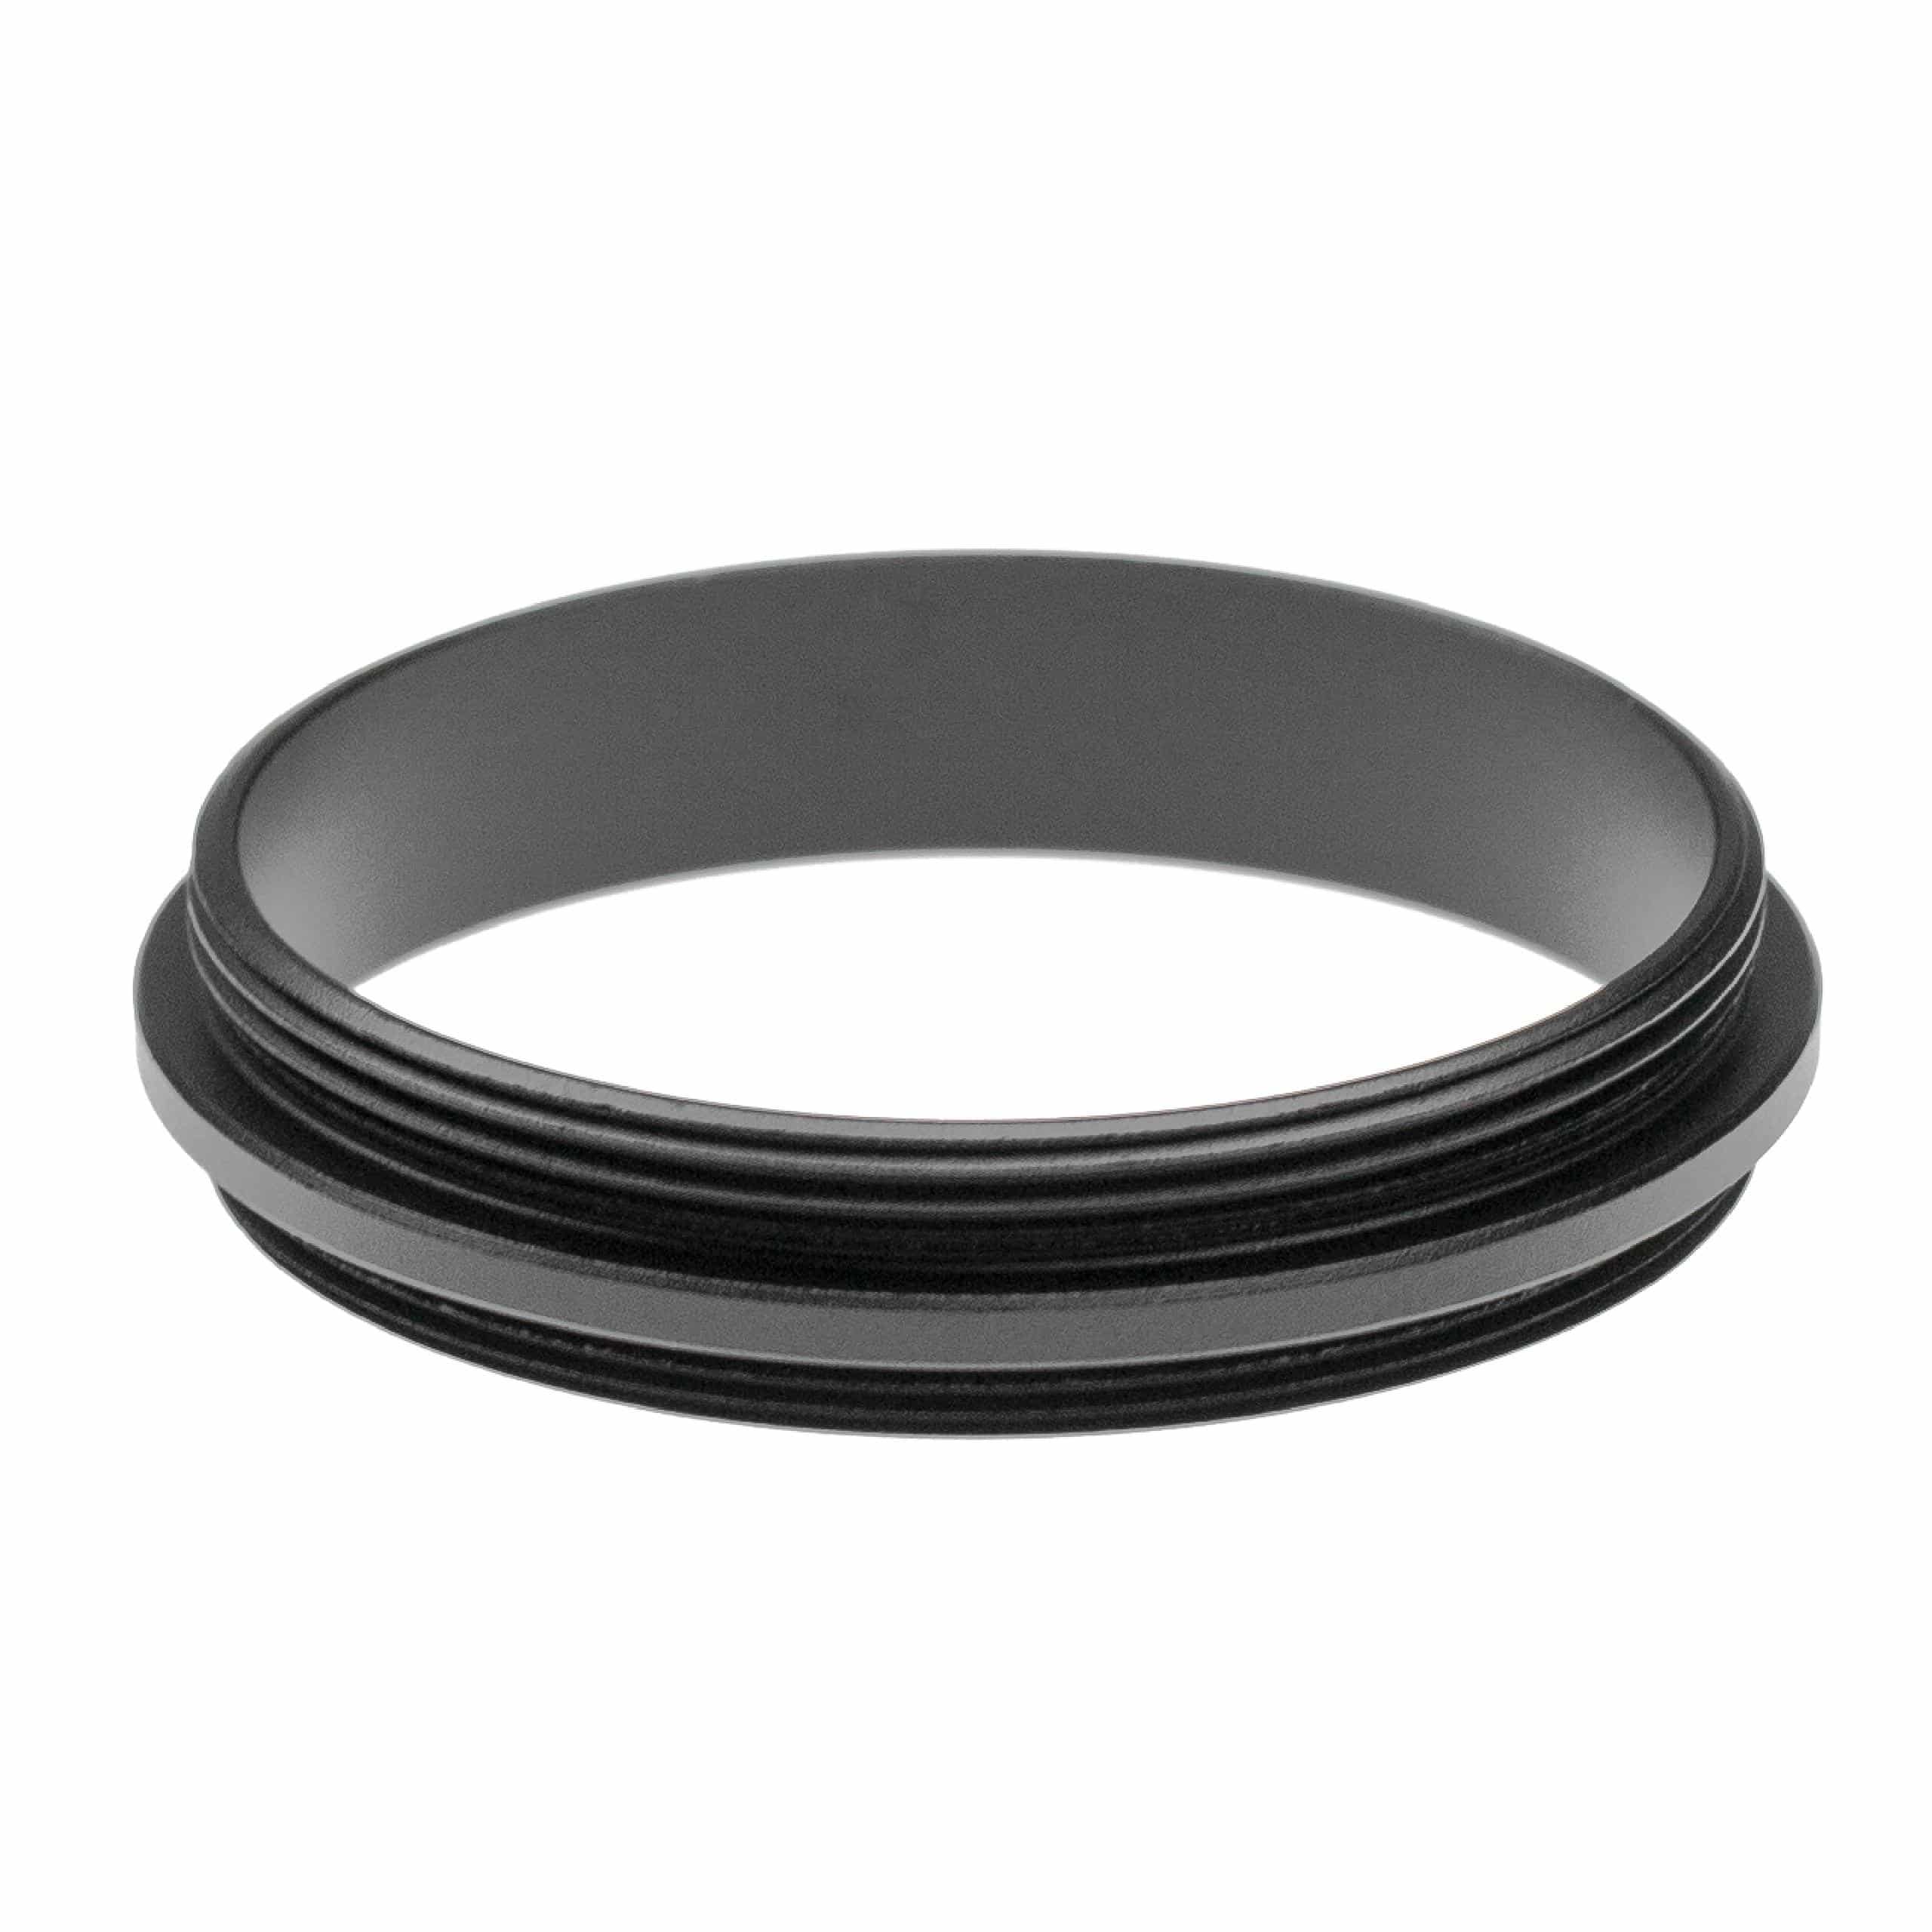 Adapter ring, T2-ring adapter, lens mount adapter M42x1 - M42x0,75 for telescope, camera, DSLR camera